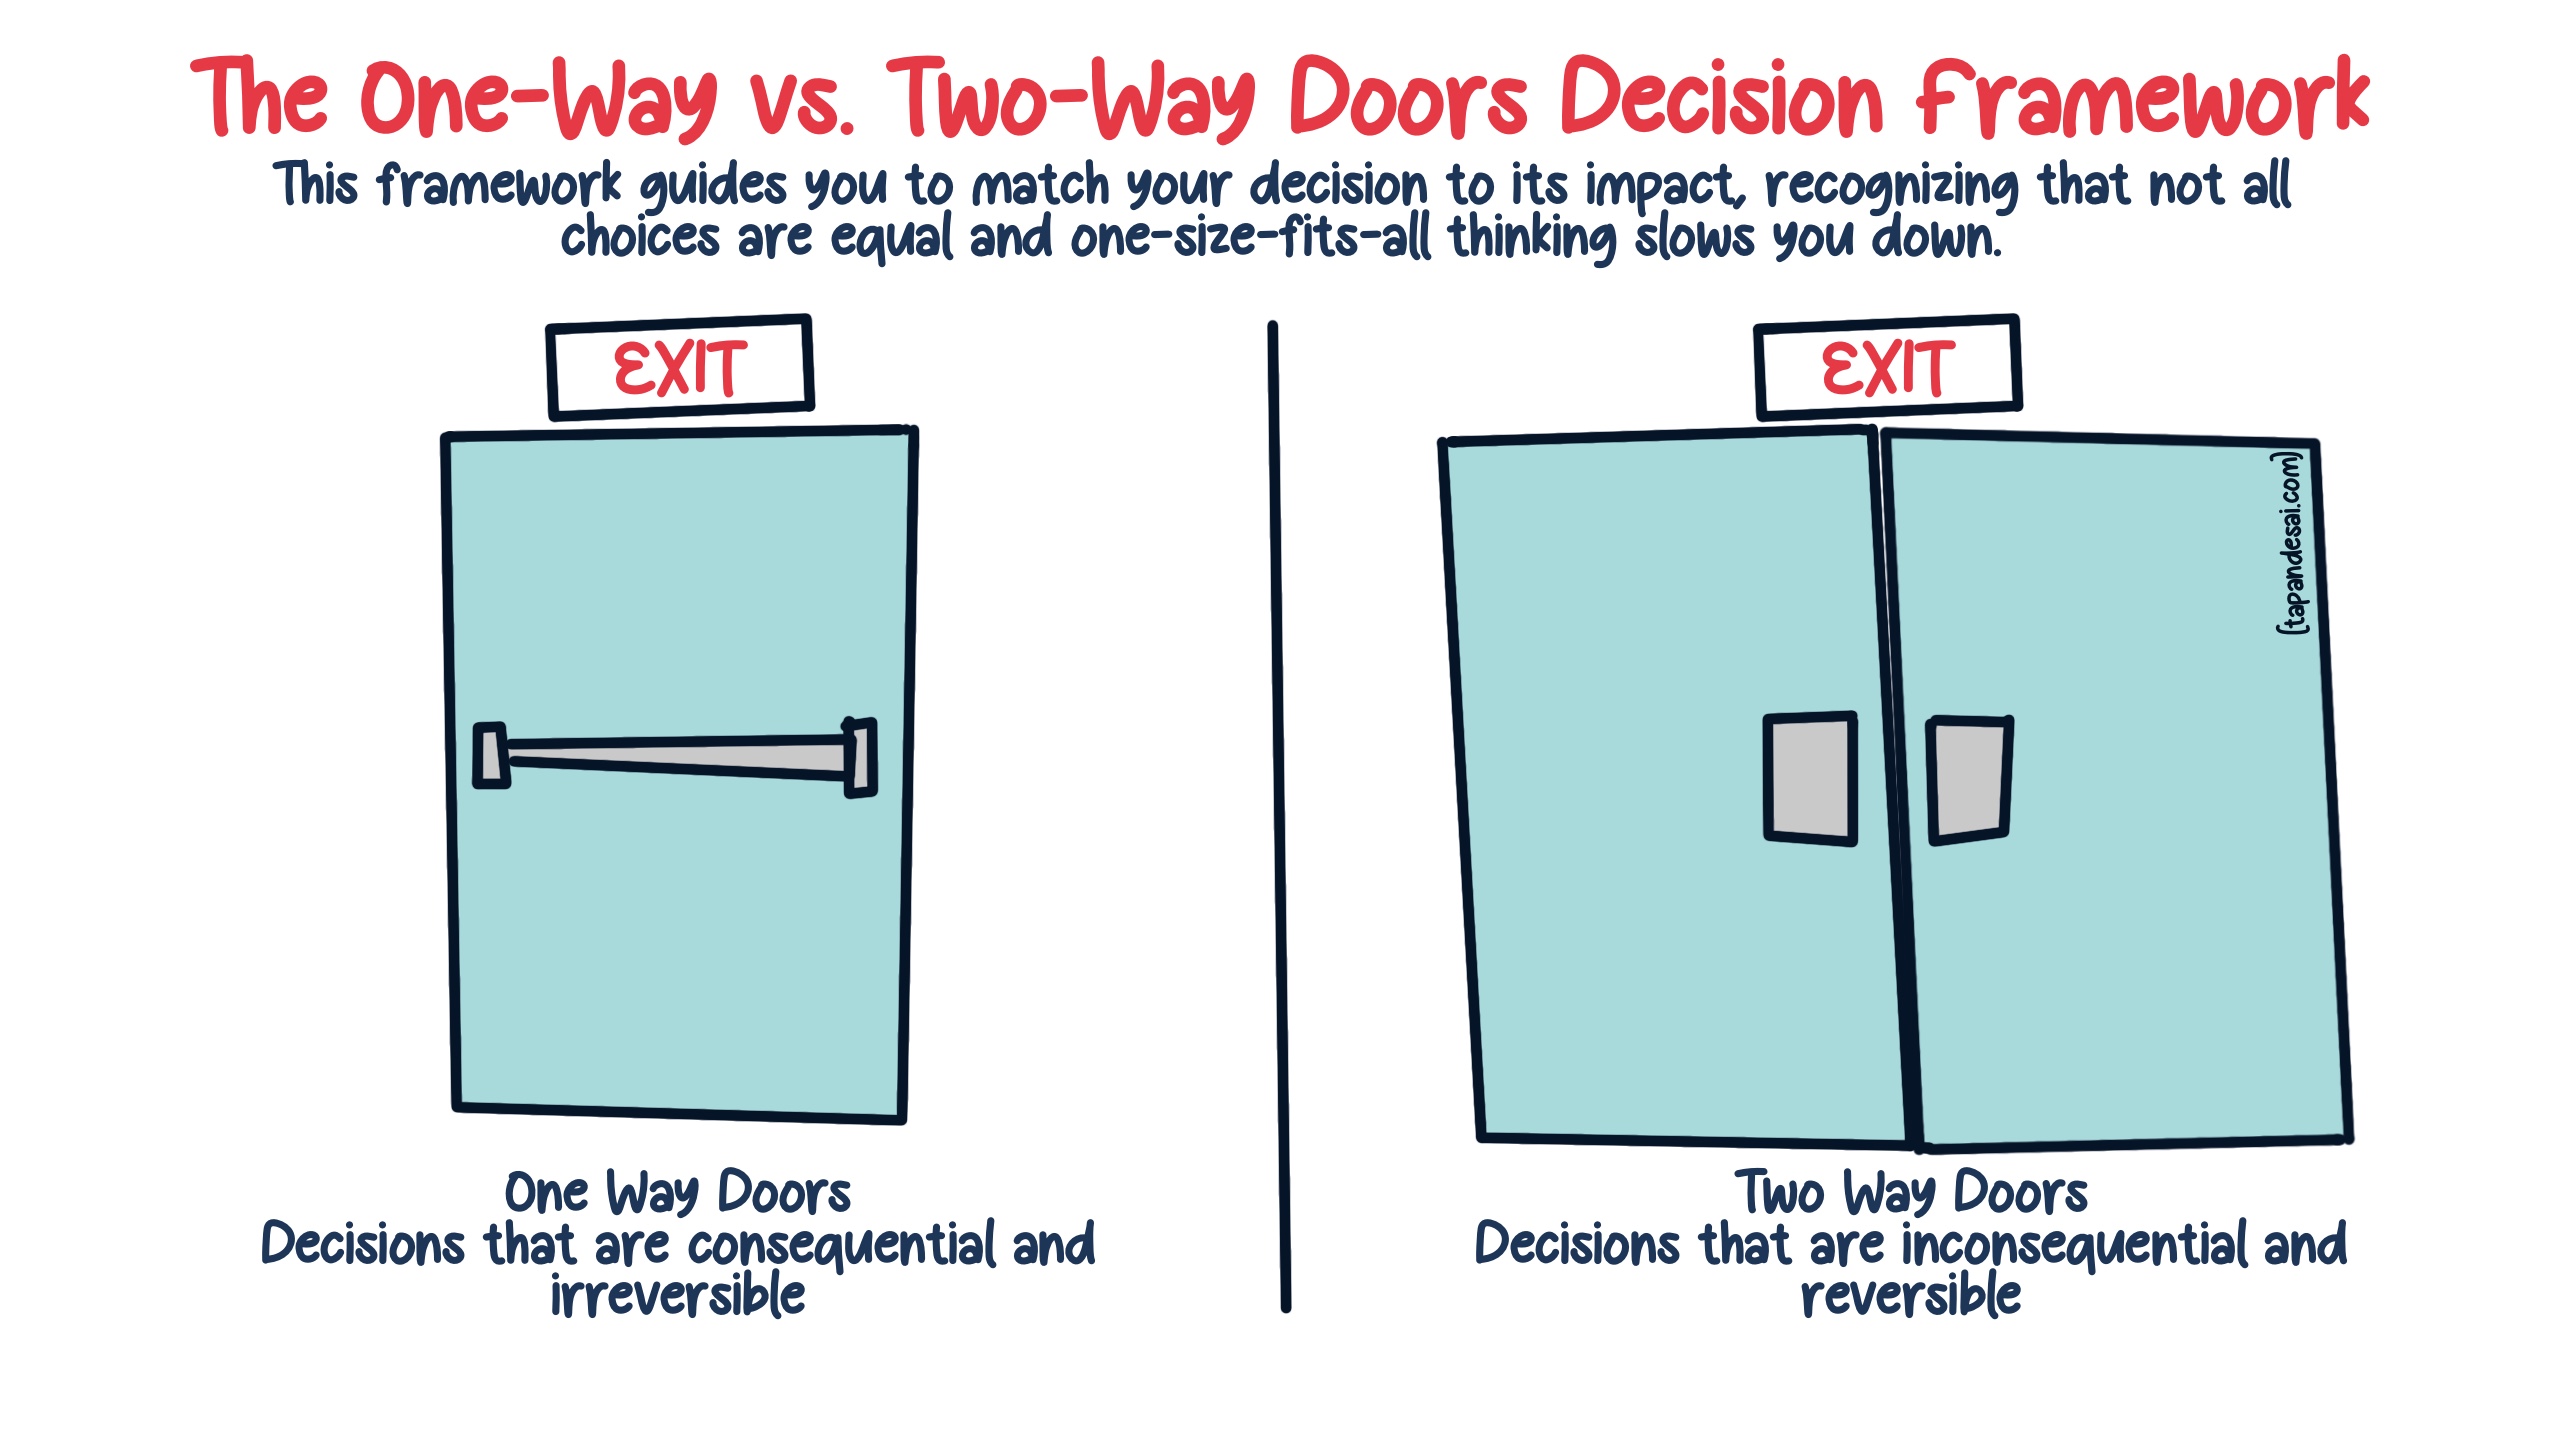 A visual explaining the concept of one-way doors (type 1) and two-way doors (type 2) decision-making